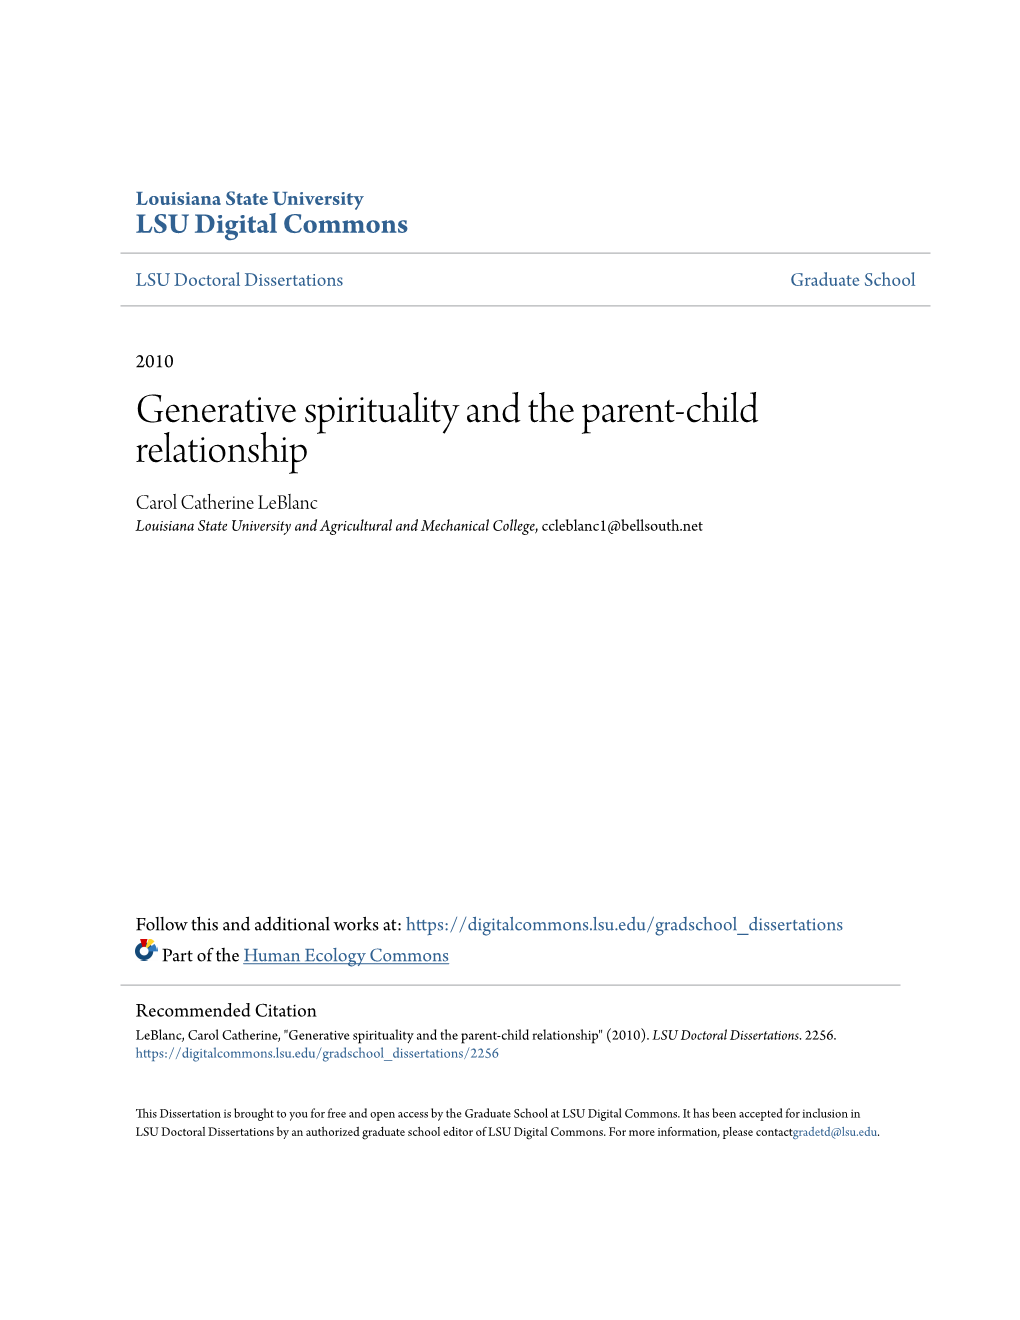 Generative Spirituality and the Parent-Child Relationship